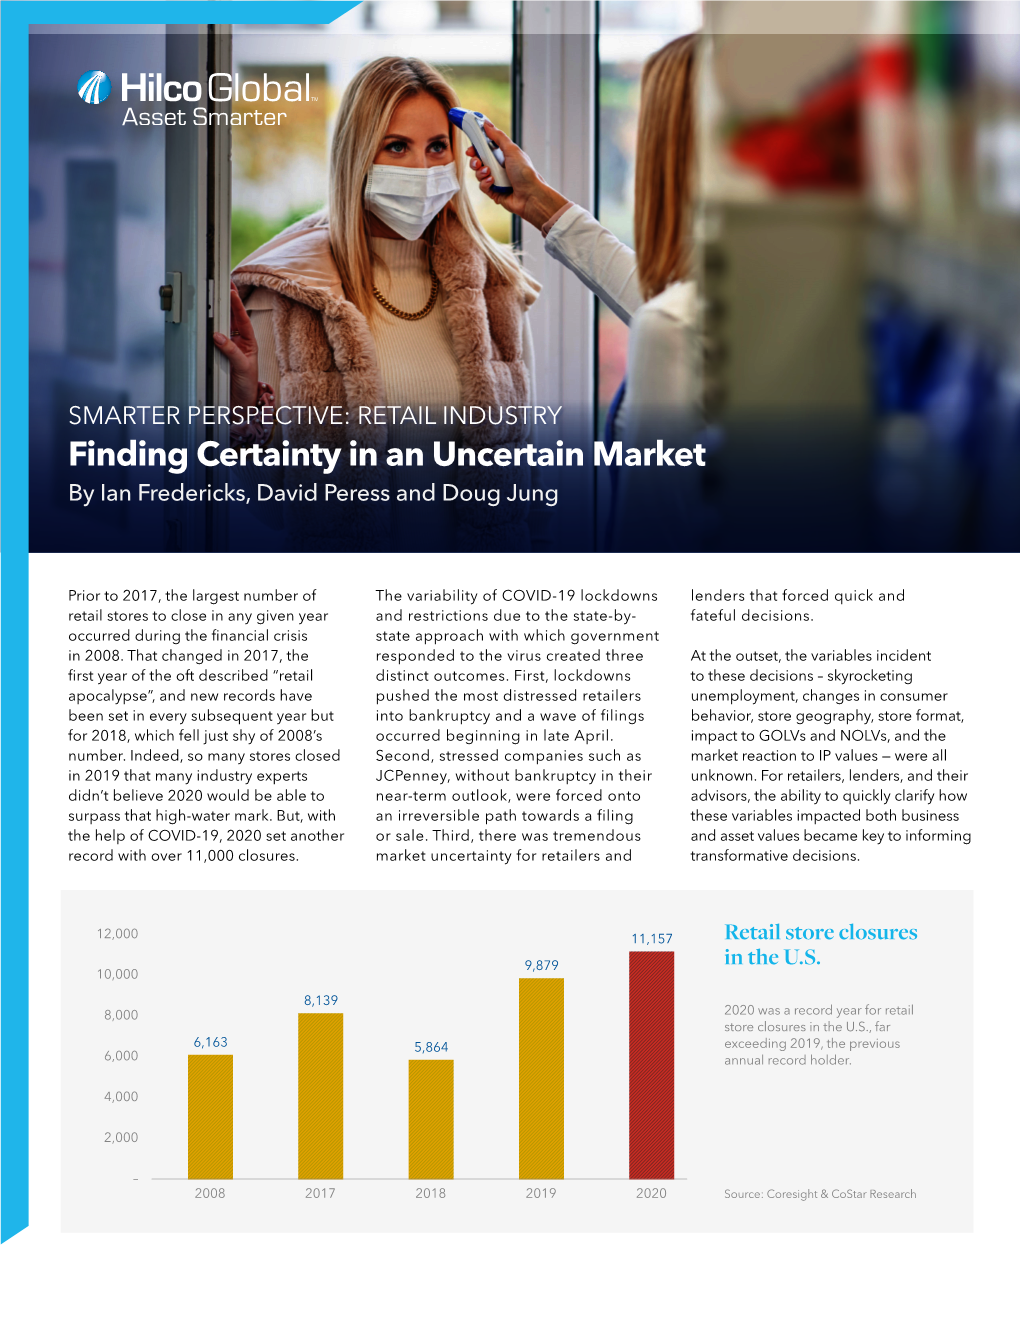 Finding Certainty in an Uncertain Market by Ian Fredericks, David Peress and Doug Jung